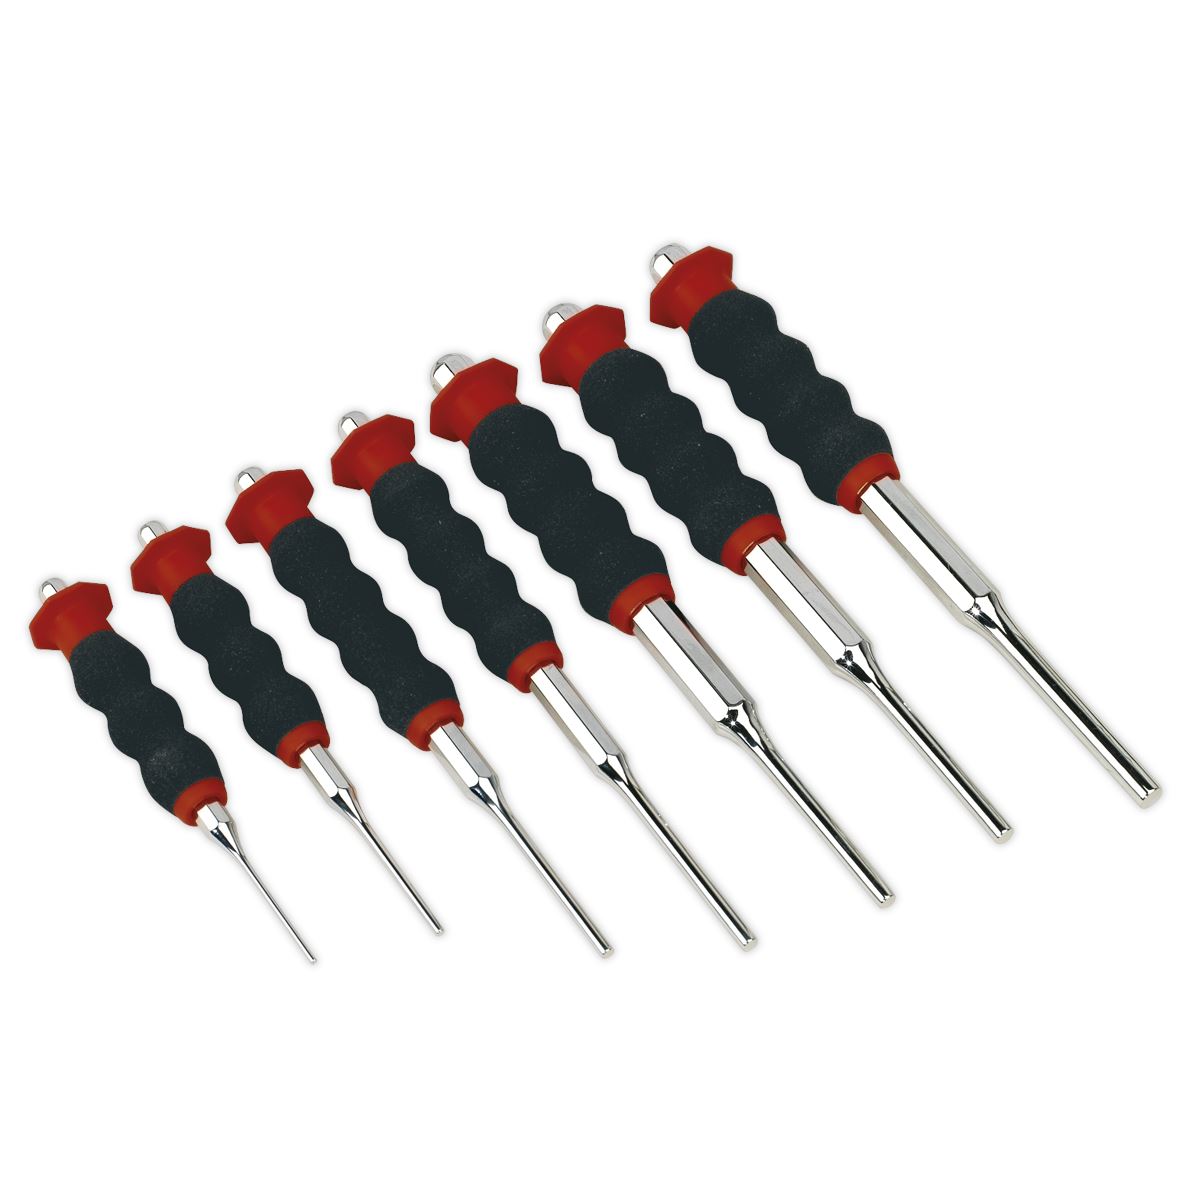 Sealey Premier Sheathed Parallel Pin Punch Set 7pc 2-8mm